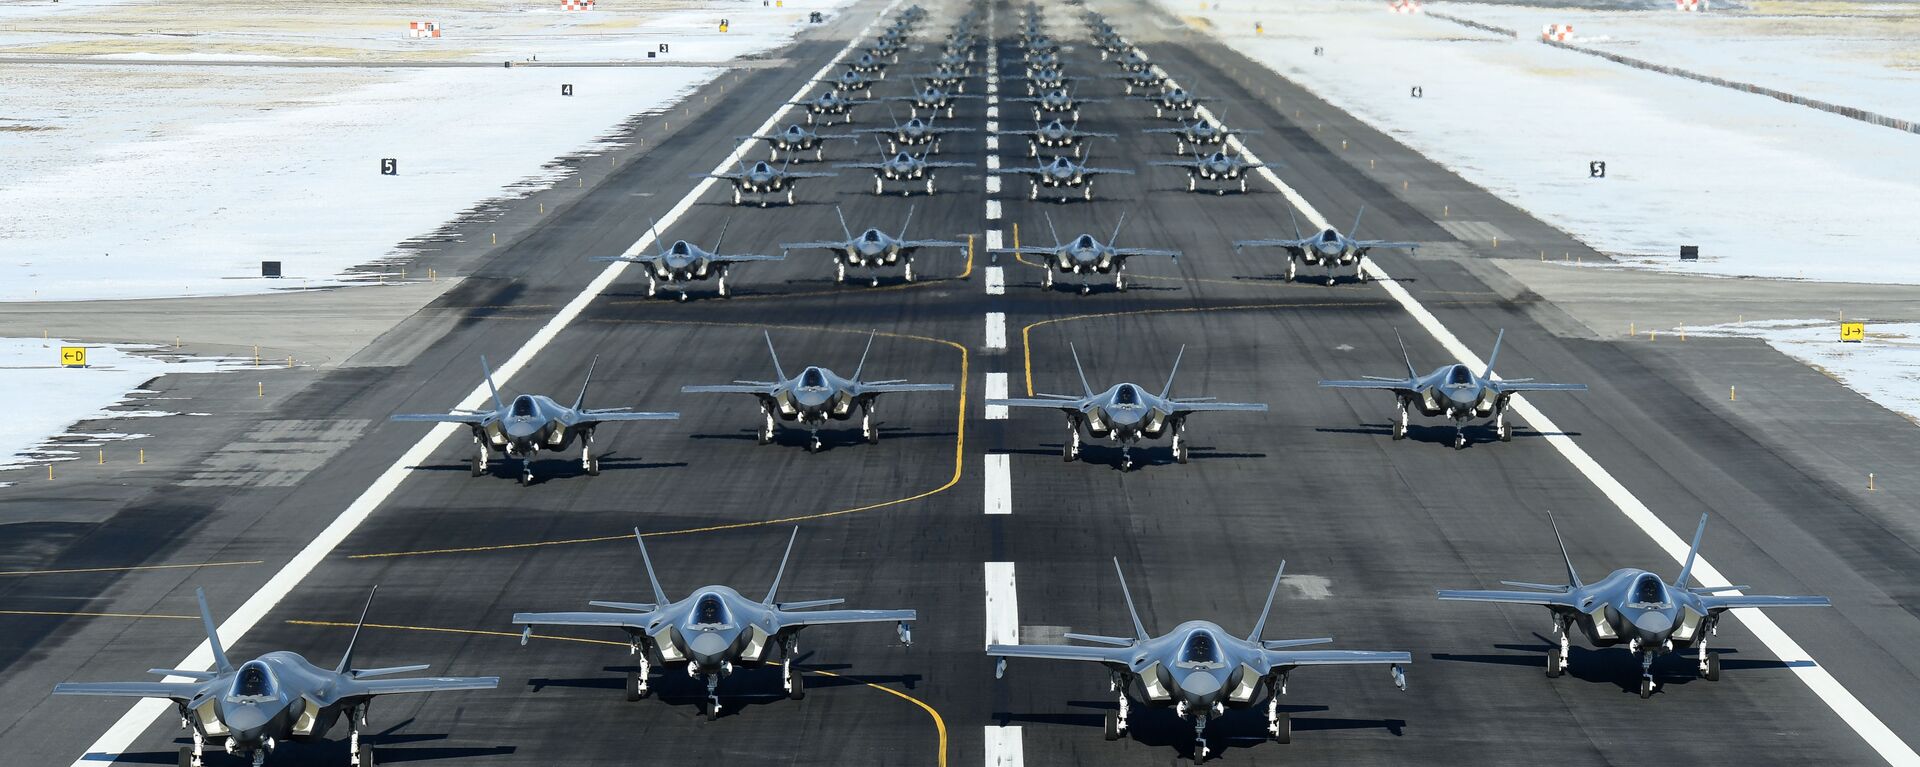 The active duty 388th and Reserve 419th Fighter Wings conducted an F-35A Combat Power Exercise at Hill Air Force Base, Utah, Jan. 6, 2020.  - اسپوتنیک افغانستان  , 1920, 31.08.2023